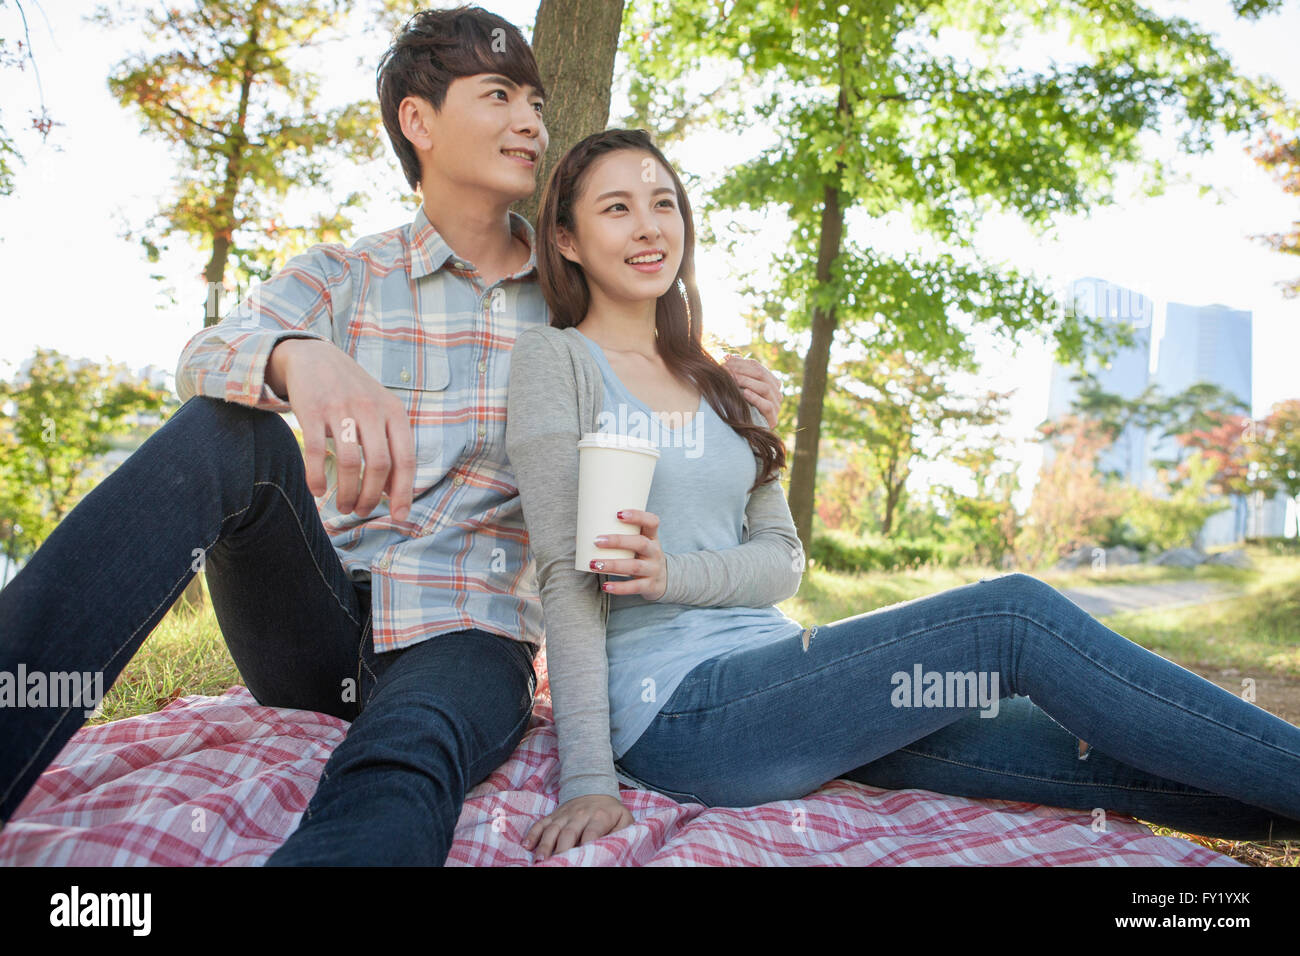 Couple seated on a grass and woman holding a cup of coffee Stock Photo